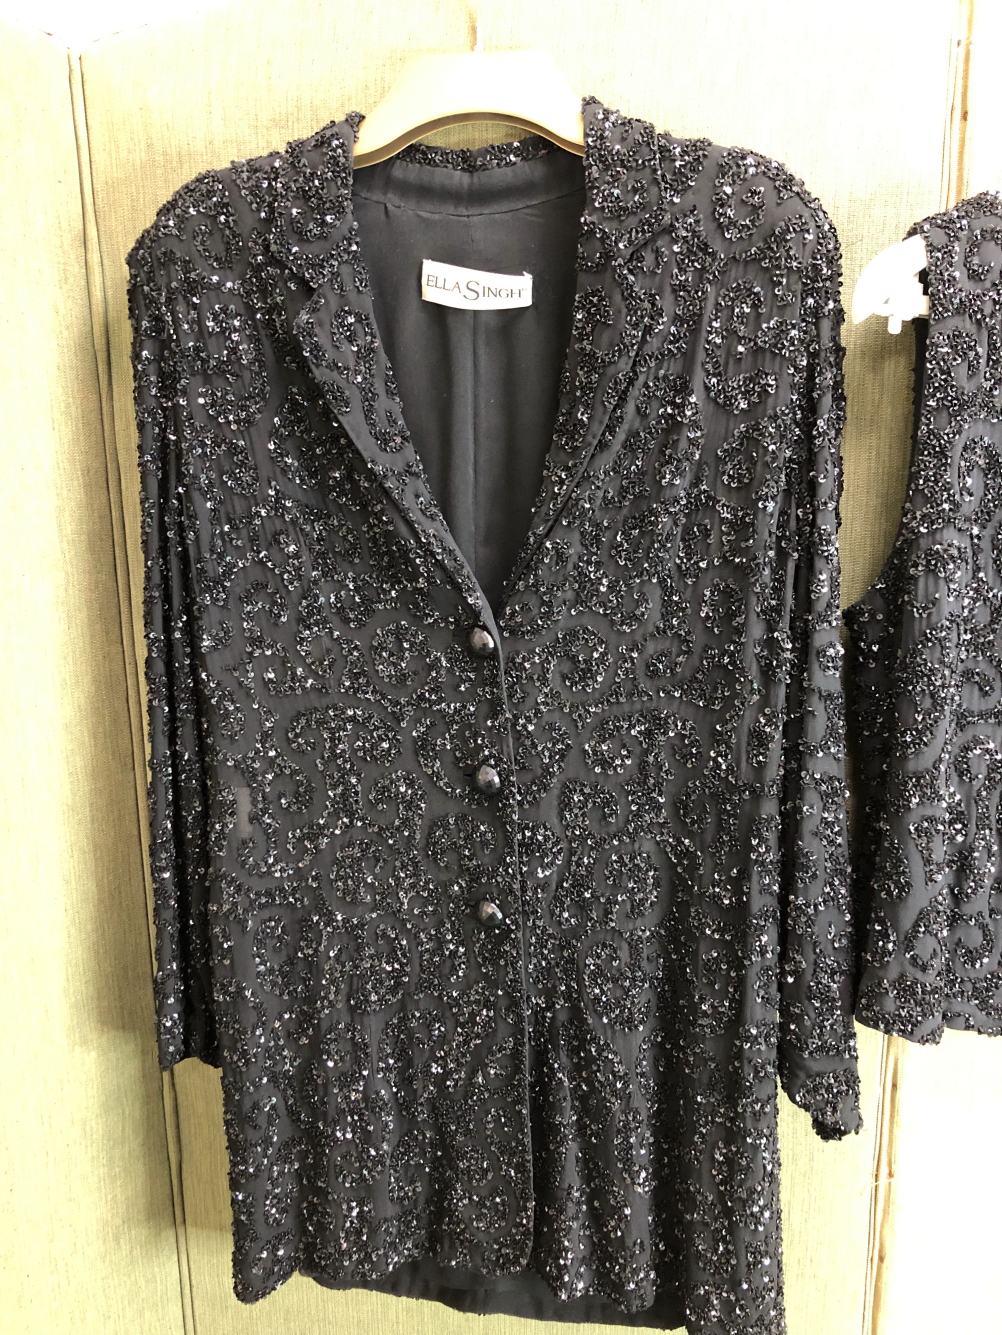 A ELLA SINGH BLACK SEQUIN JACKET SIZE 42 AND MATCHING VEST TOP SIZE 40 - Image 4 of 7